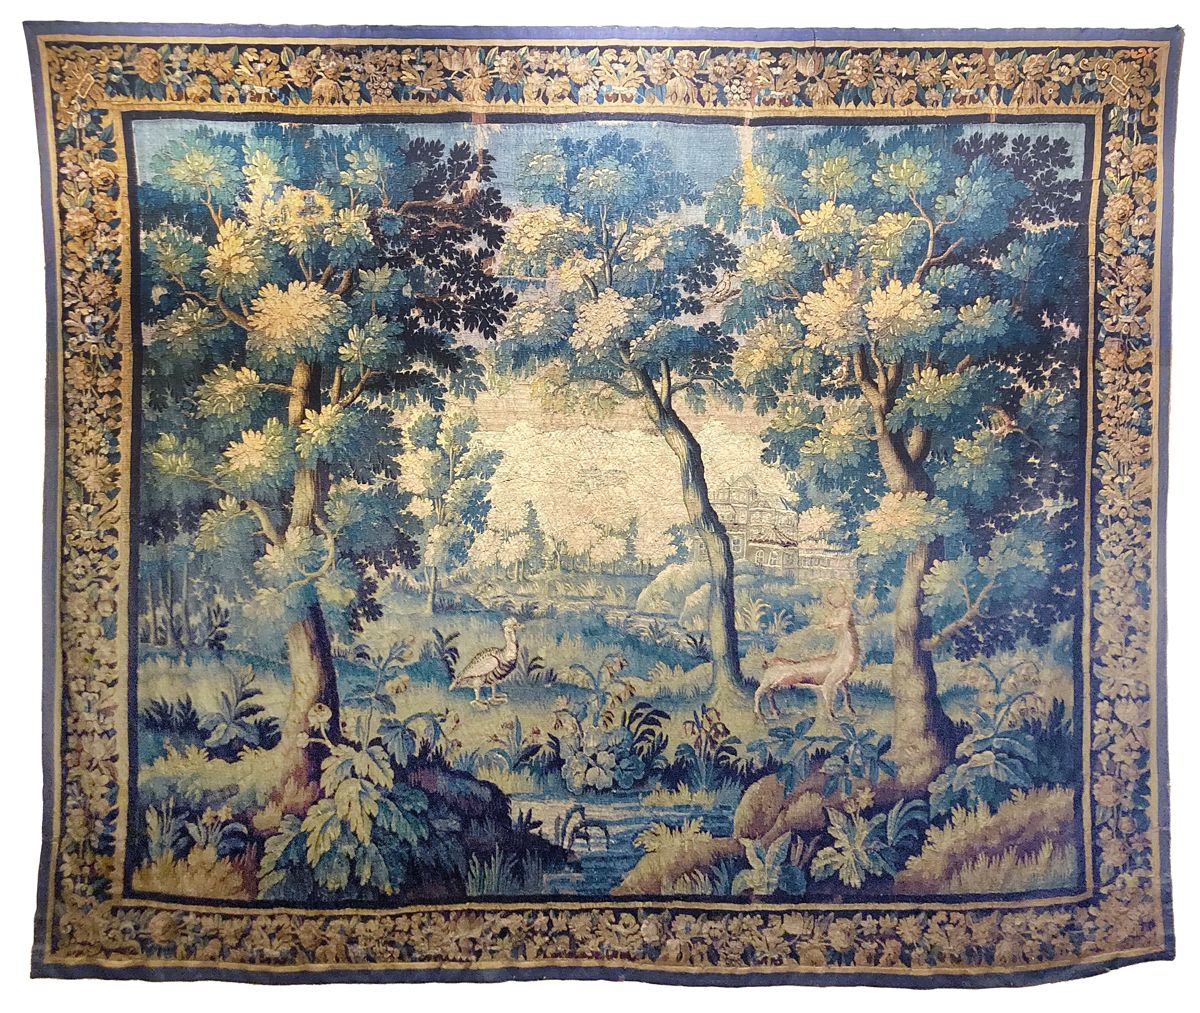 AUBUSSON, FRANCE 18ème SIECLE Important wall tapestry.
In wool representing an a&hellip;